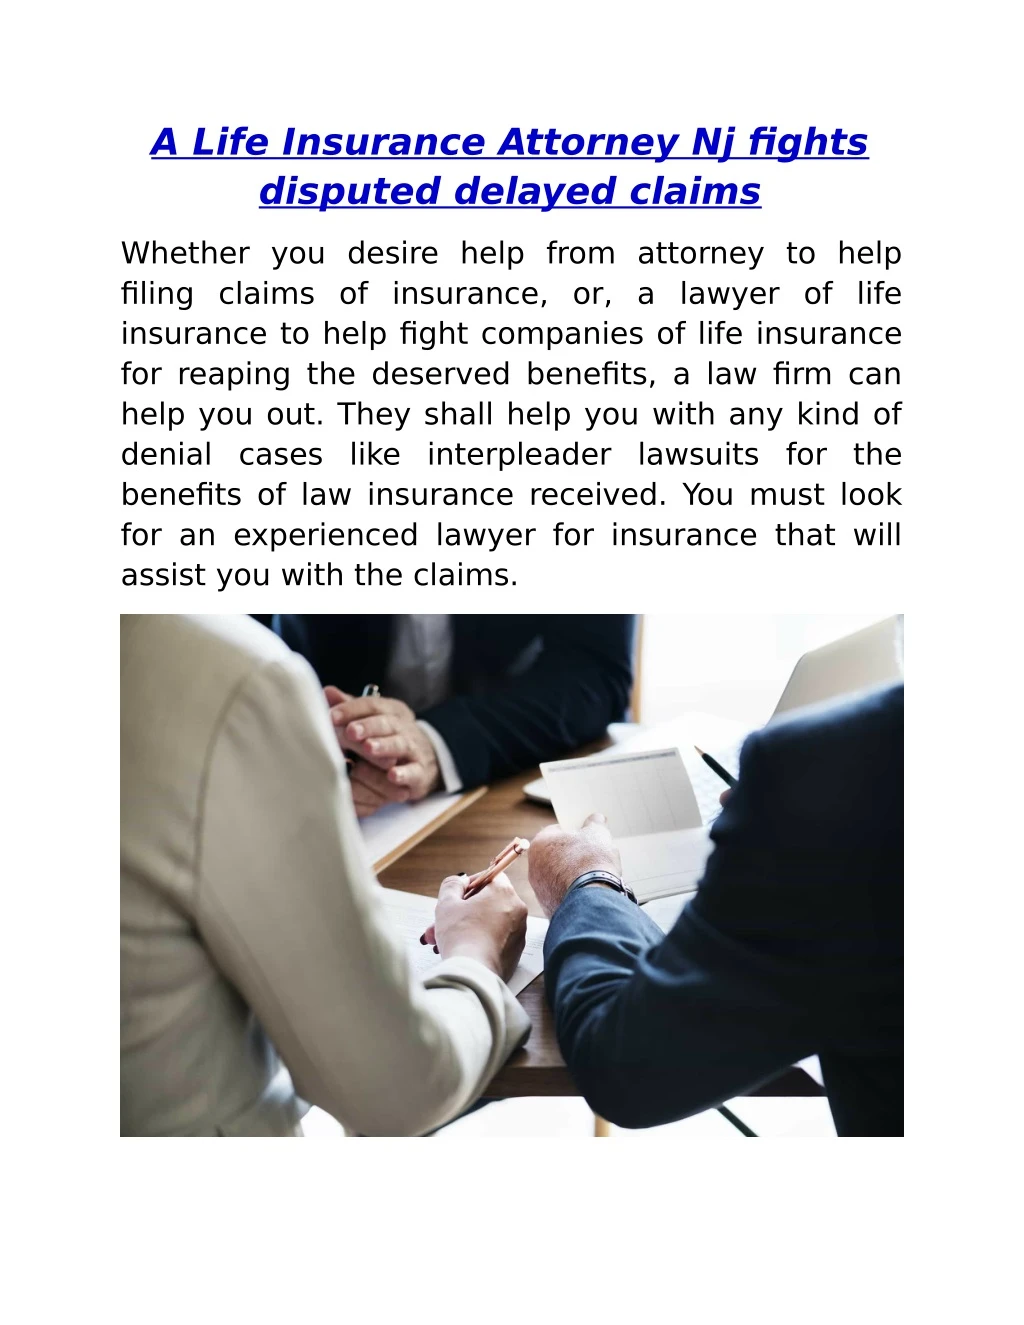 a life insurance attorney nj fights disputed